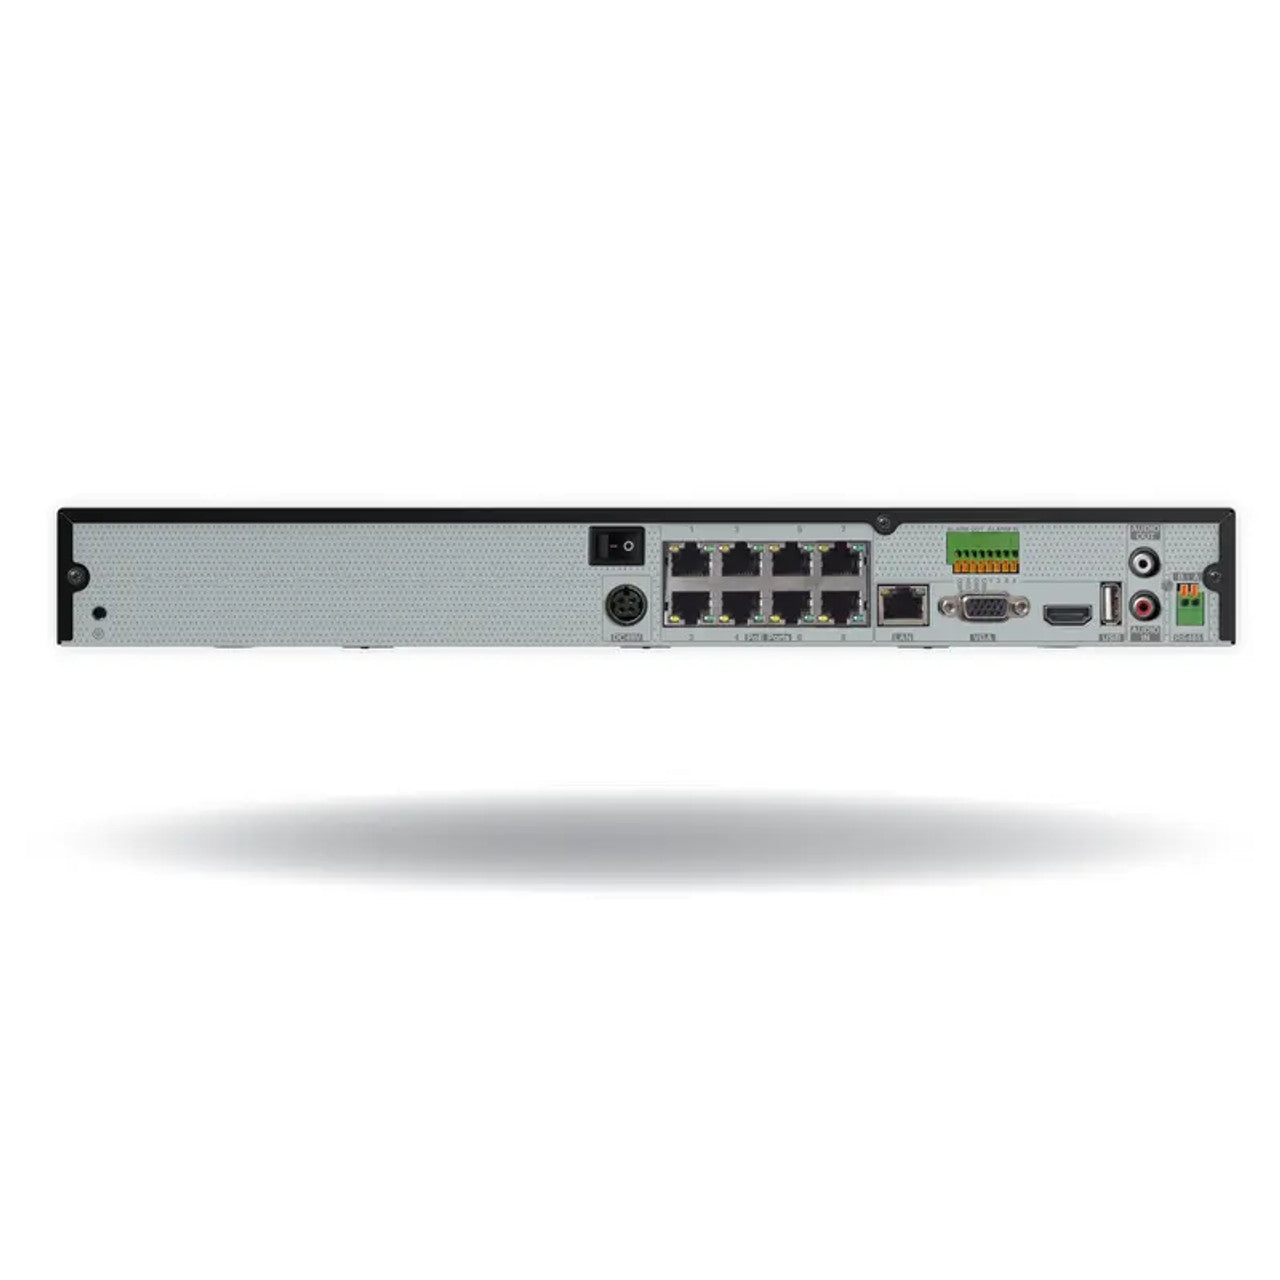 Digital Watchdog DW-VG41232T8P VMAX IP G4 8 Channel PoE NVR with 4 bonus channels with 32TB Hard Drive, 12-Channel